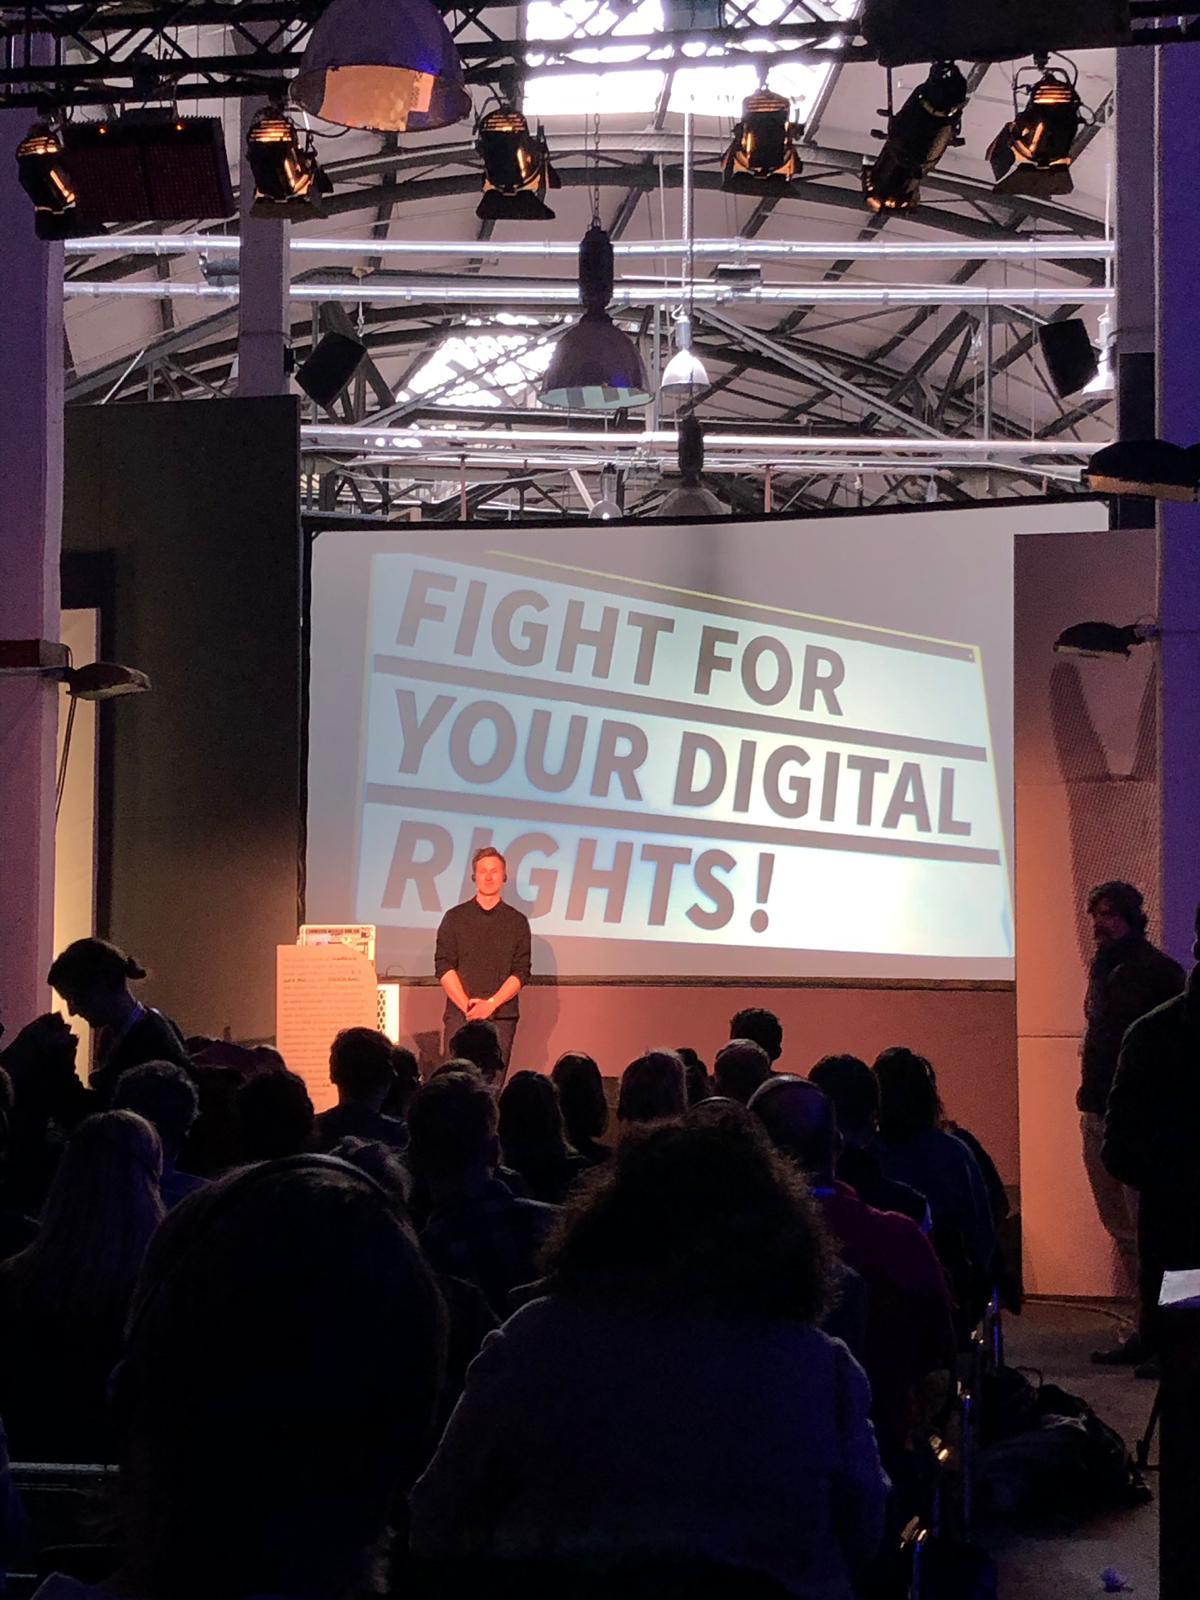 Fight for your digital rights